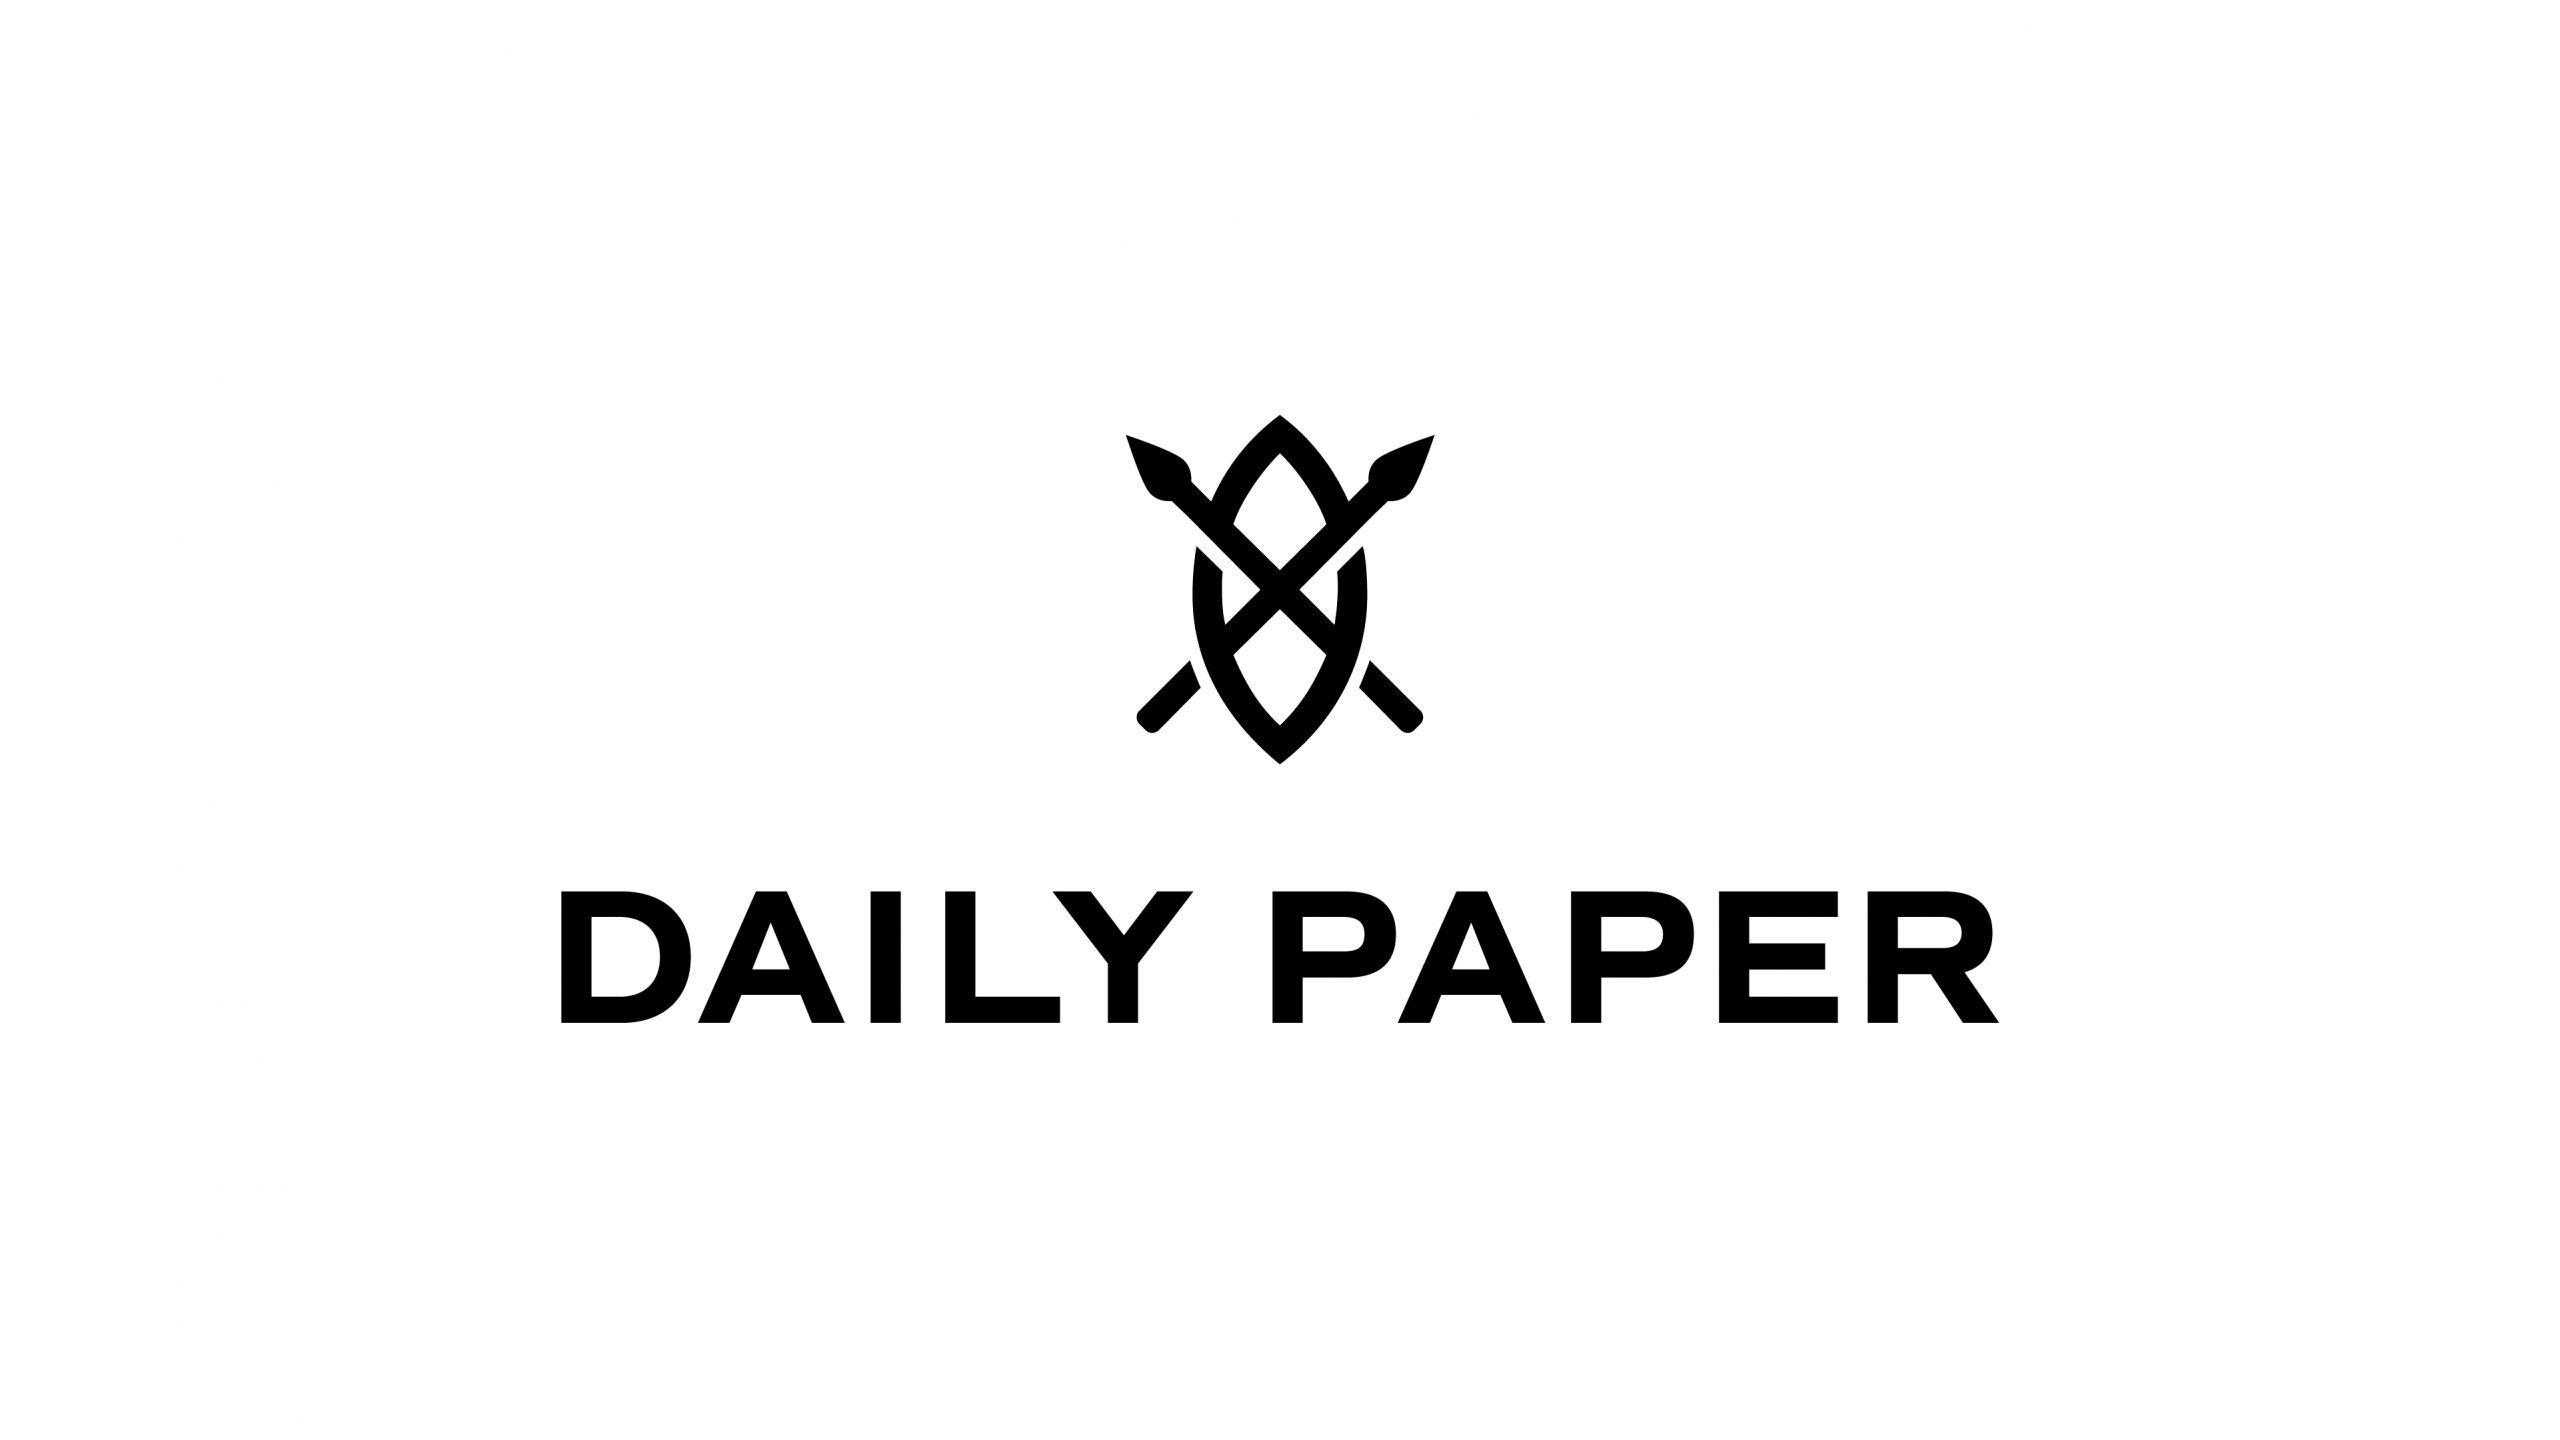 Daily Paper Clothing GIFs on GIPHY - Be Animated